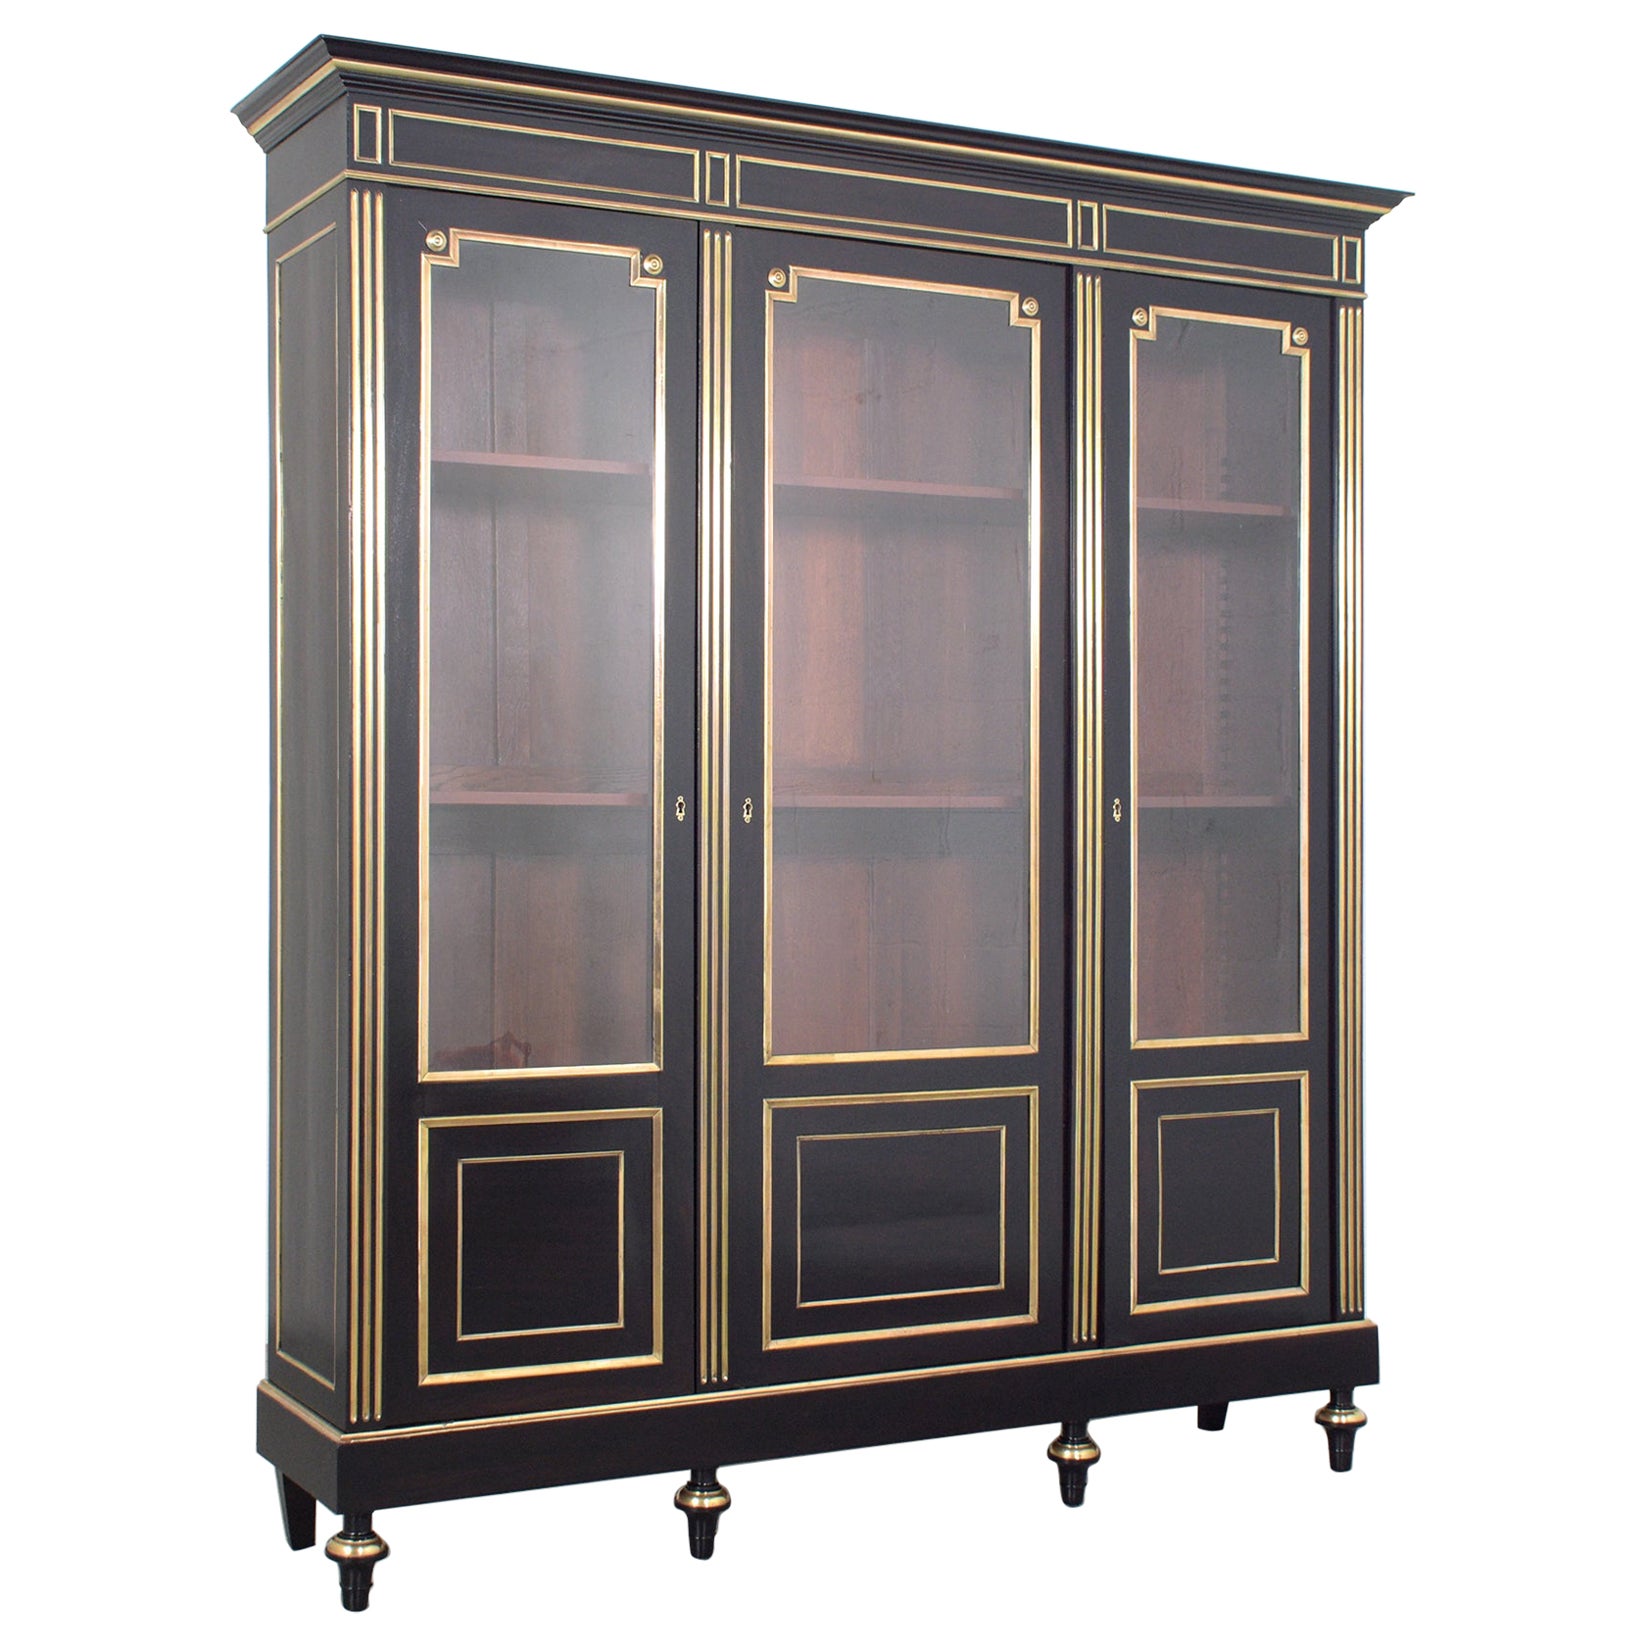 1870s Antique Louis XVI Mahogany Bookcase with Brass Moldings and Glass Doors For Sale